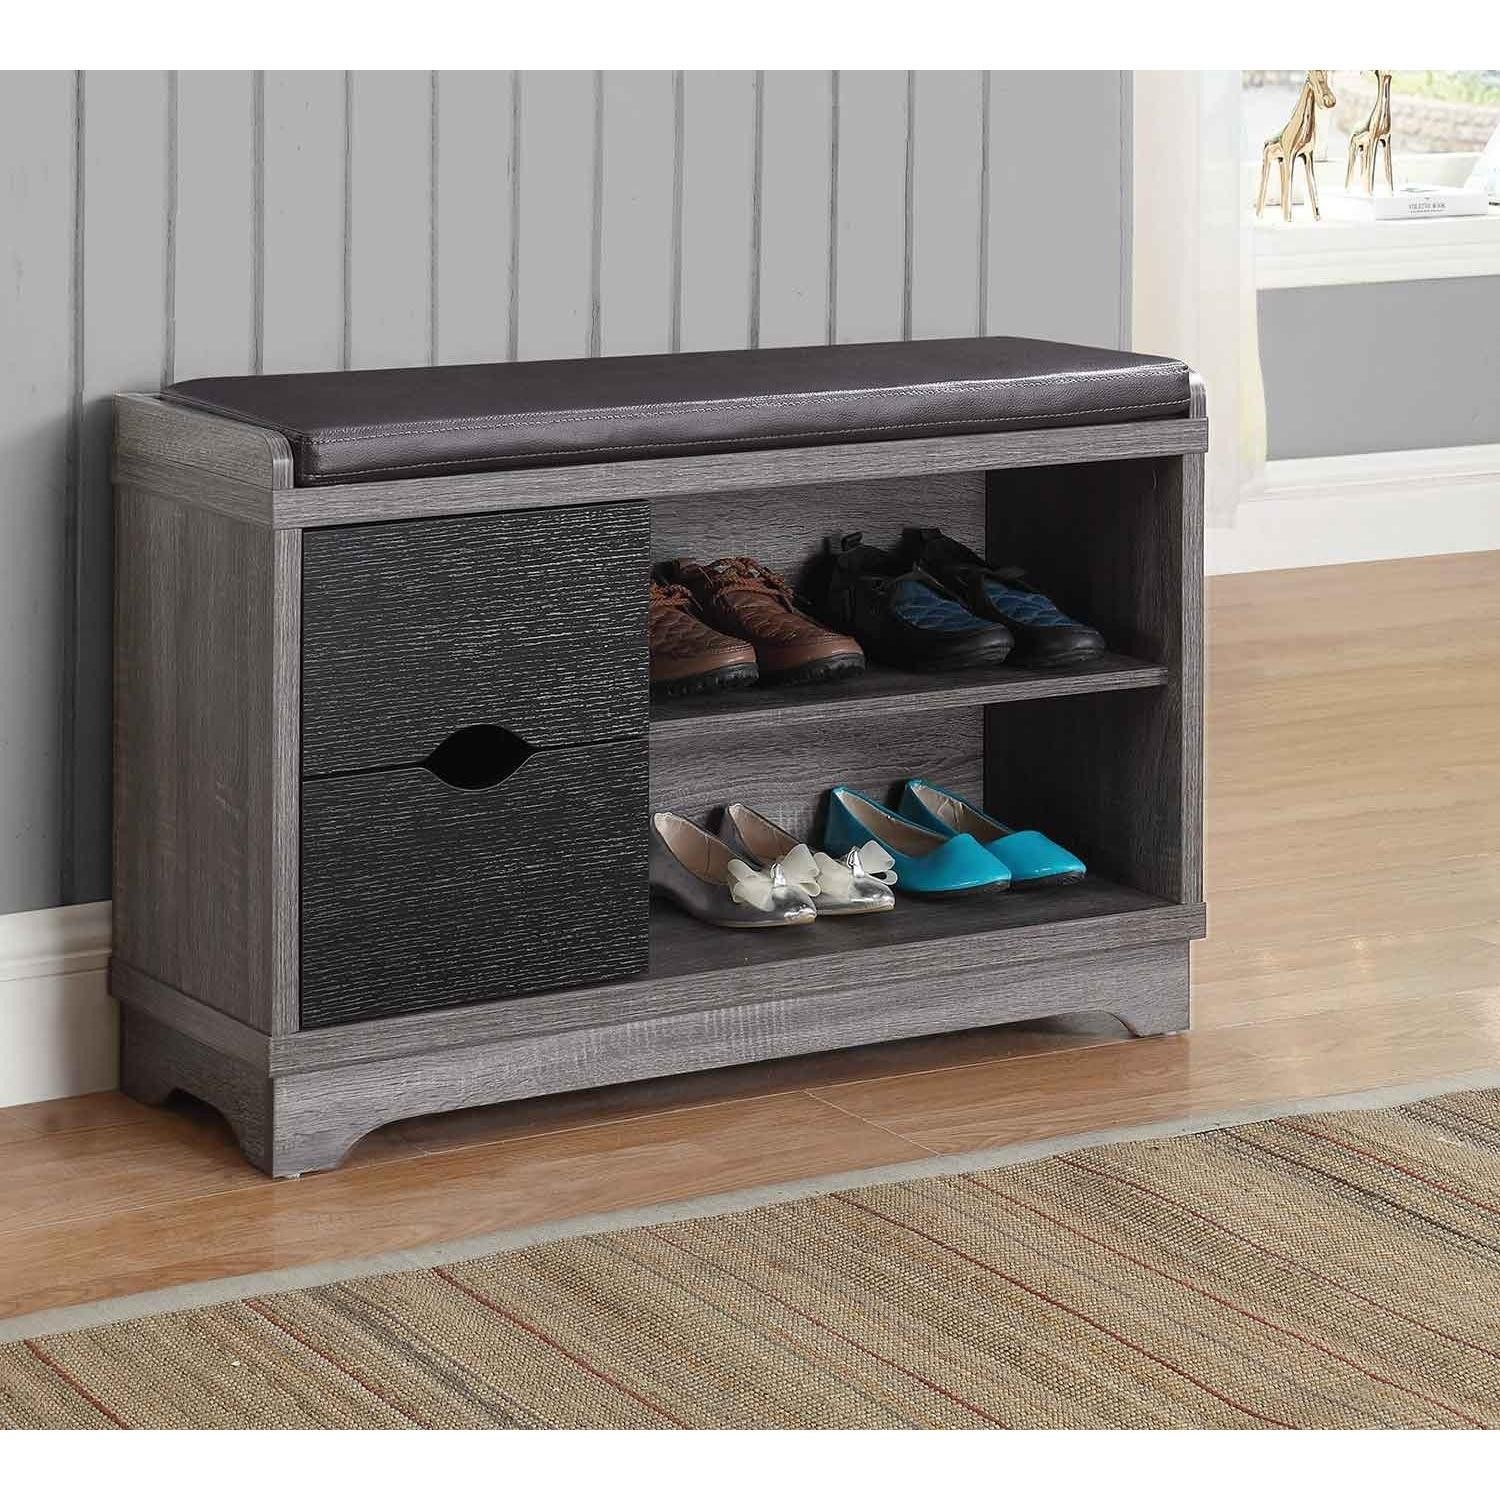 How to Choose a Shoe Storage Cabinet - Foter